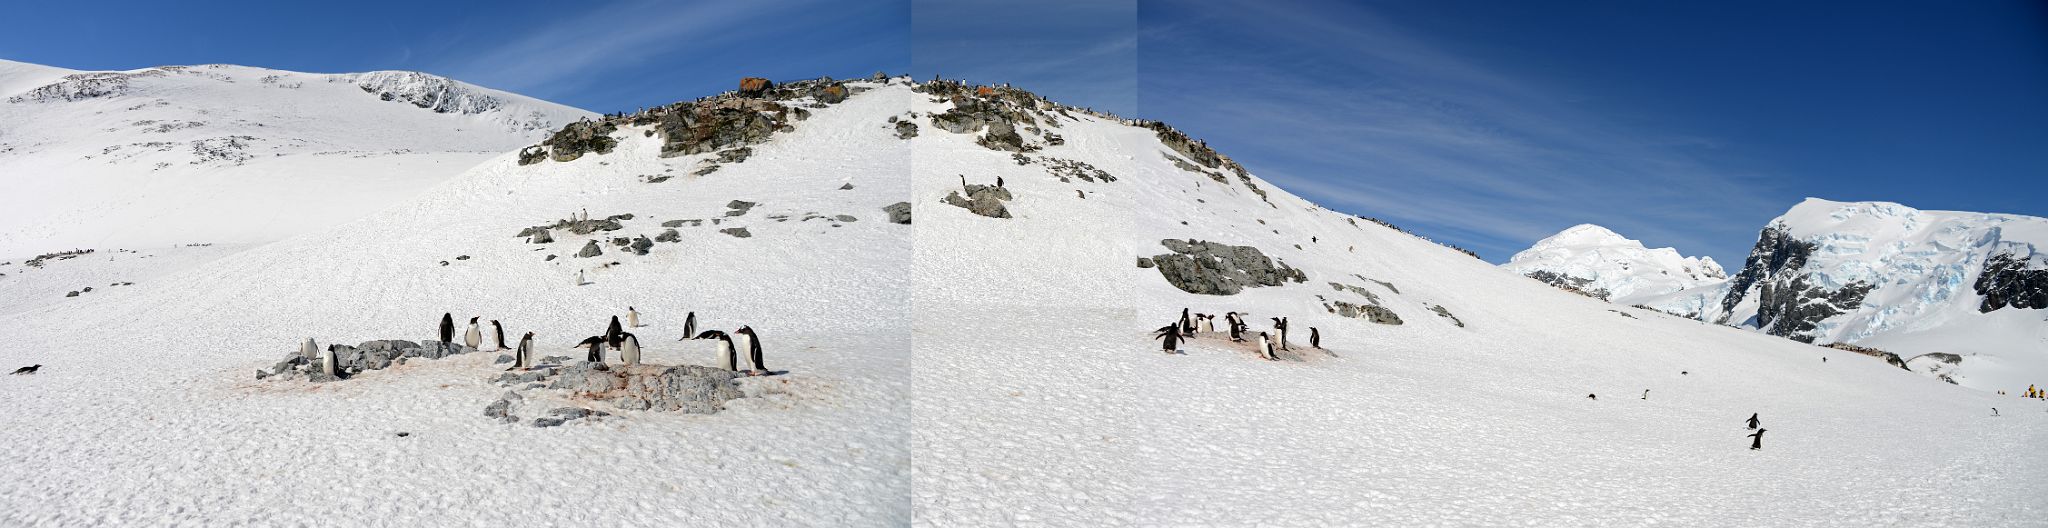 22A Panoramic View Of Gentoo Penguins On Cuverville Island On Quark Expeditions Antarctica Cruise